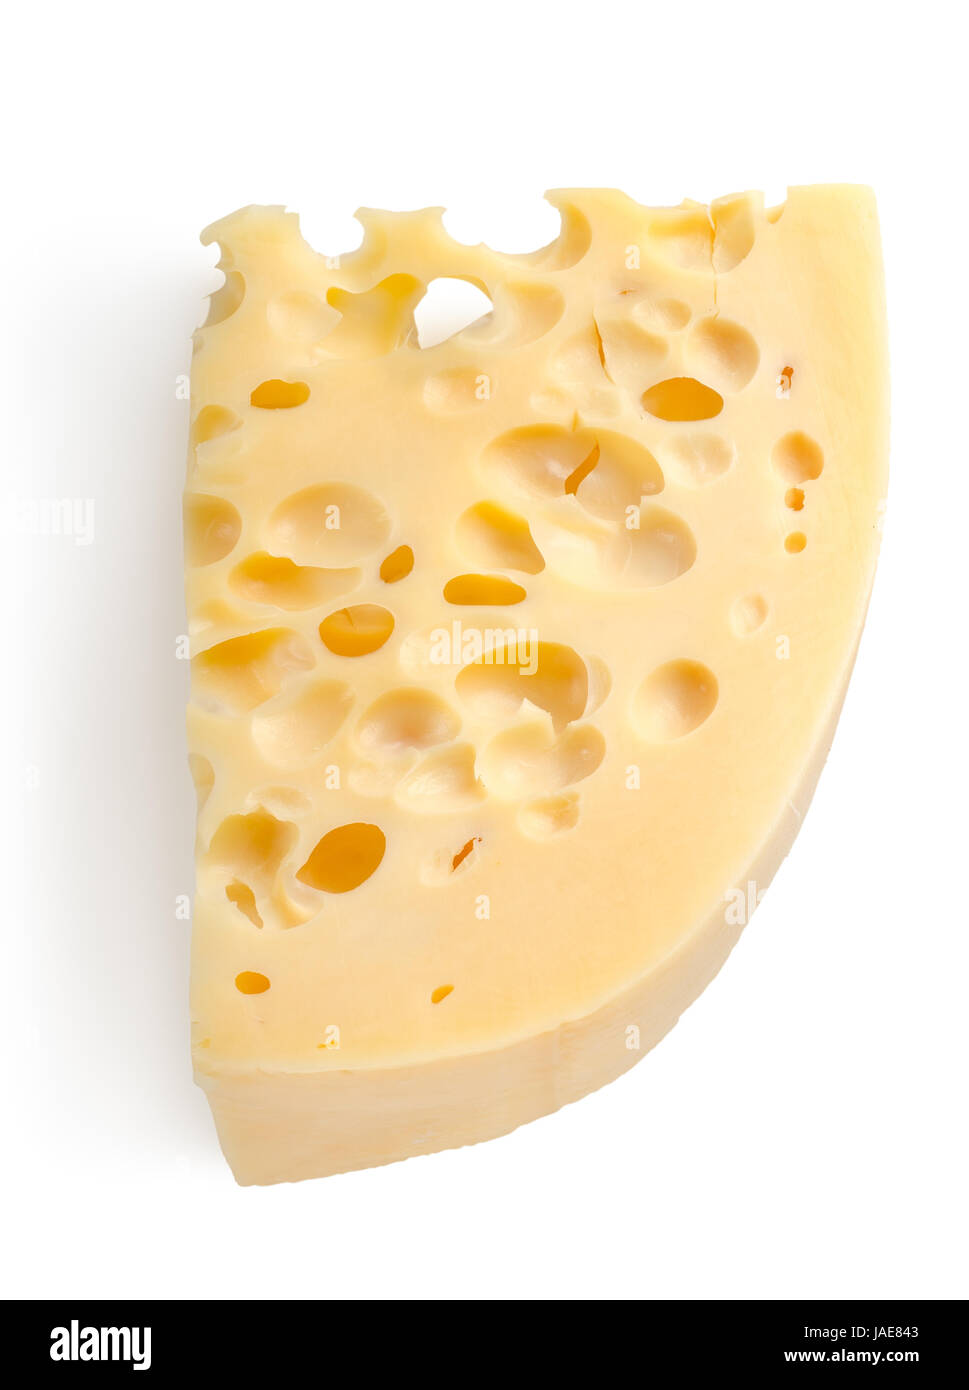 Swiss cheese isolated on a white backgroun Stock Photo